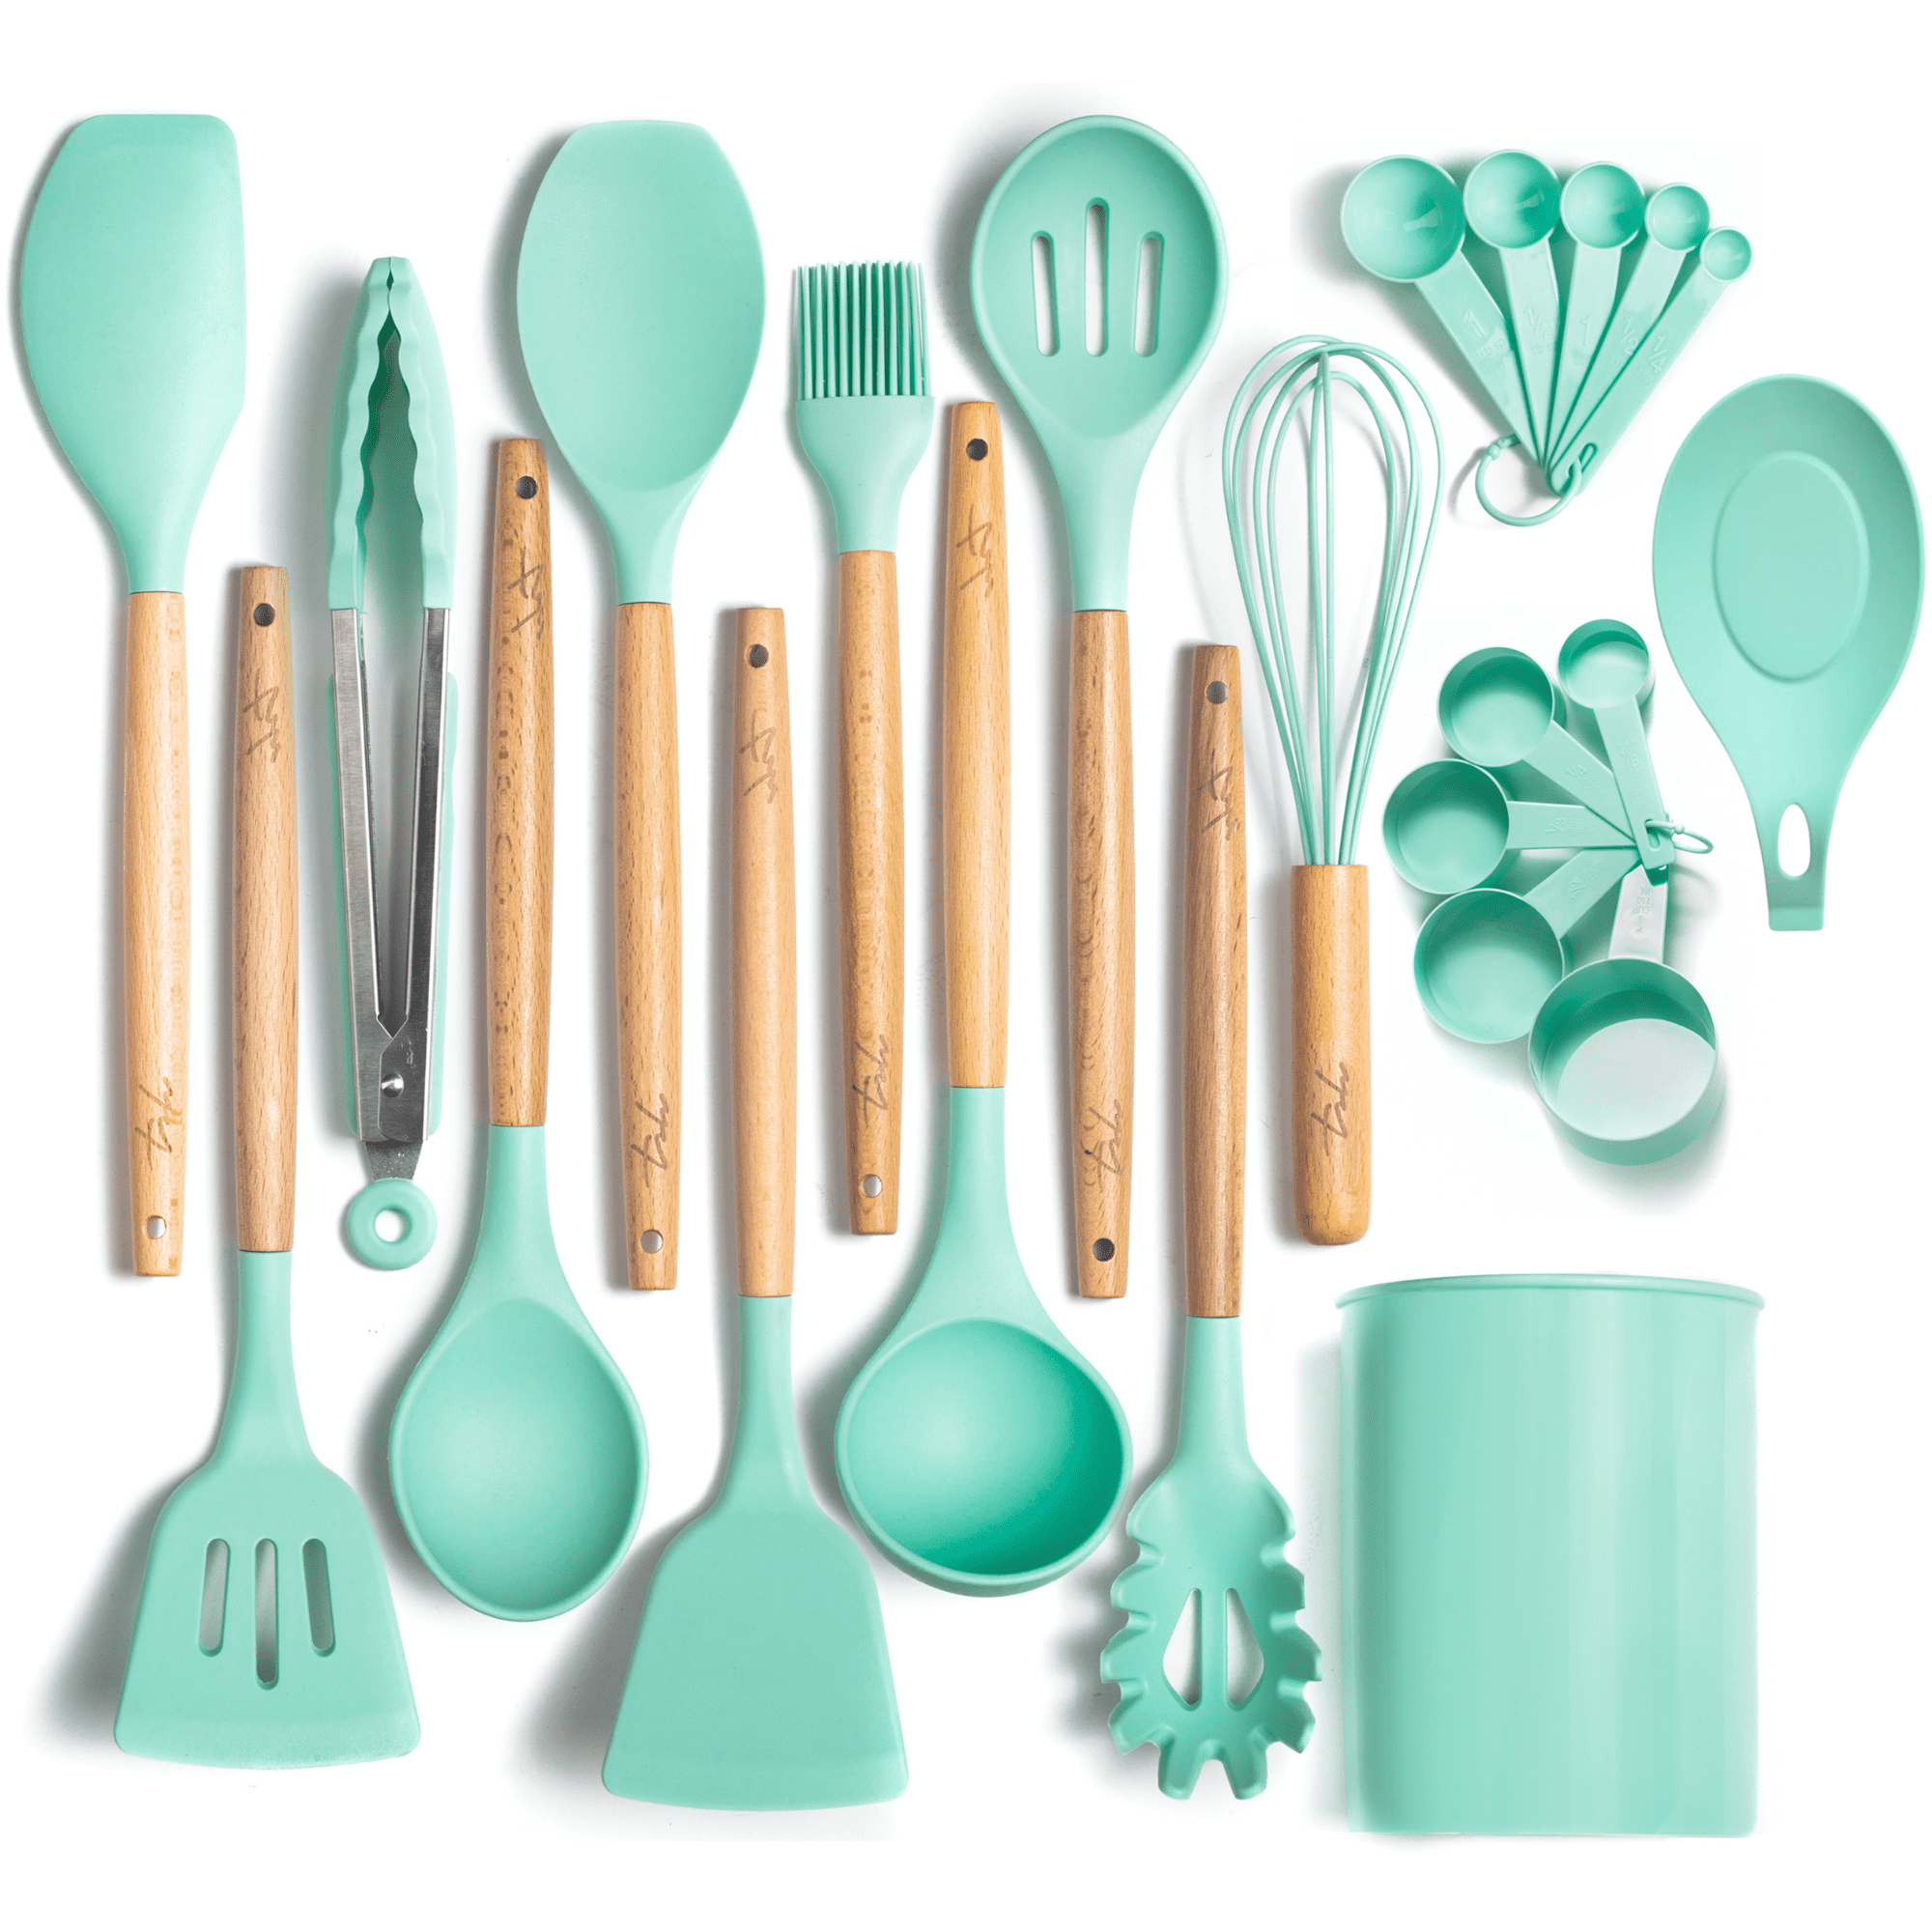 New Green Ice cmsHome Individual Silicone Kitchen Utensils